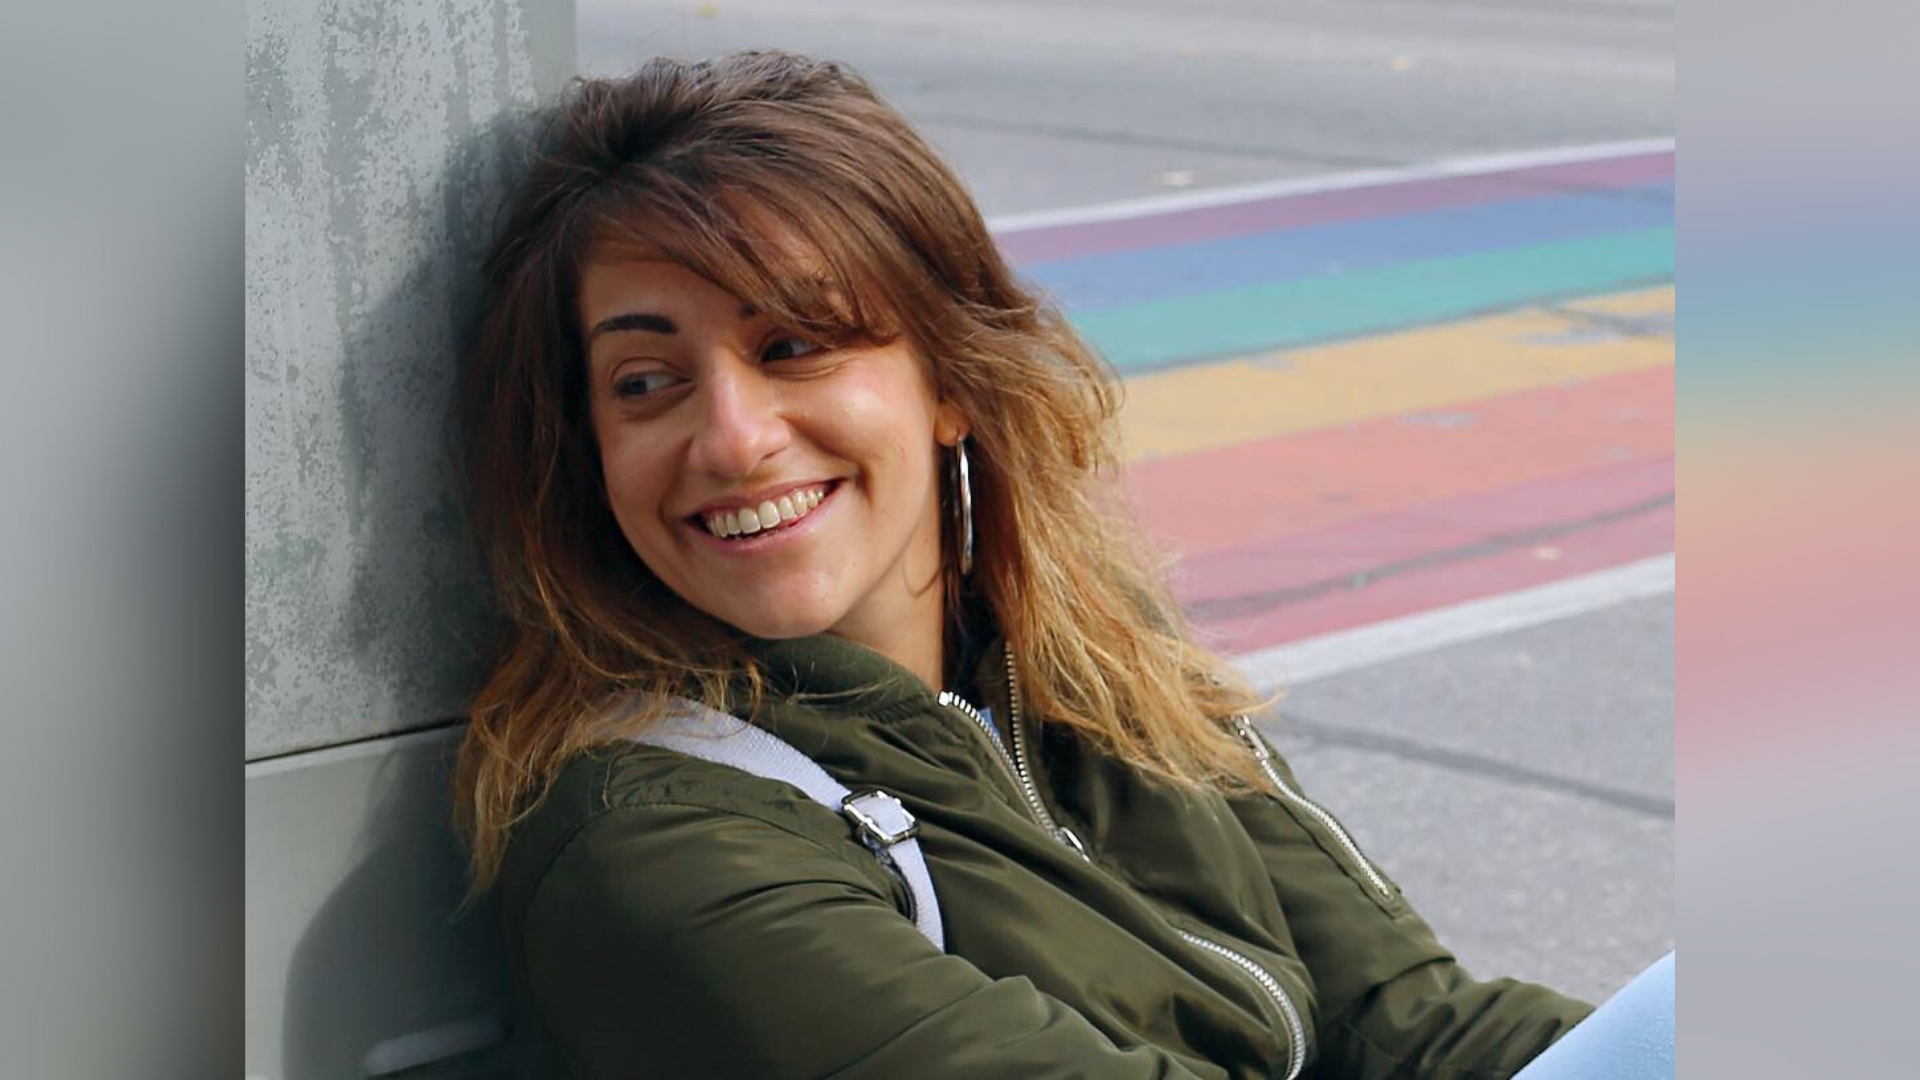 Lesbian Youtuber Arielle Scarcella On Why Shes Leaving The Left Laptrinhx News 